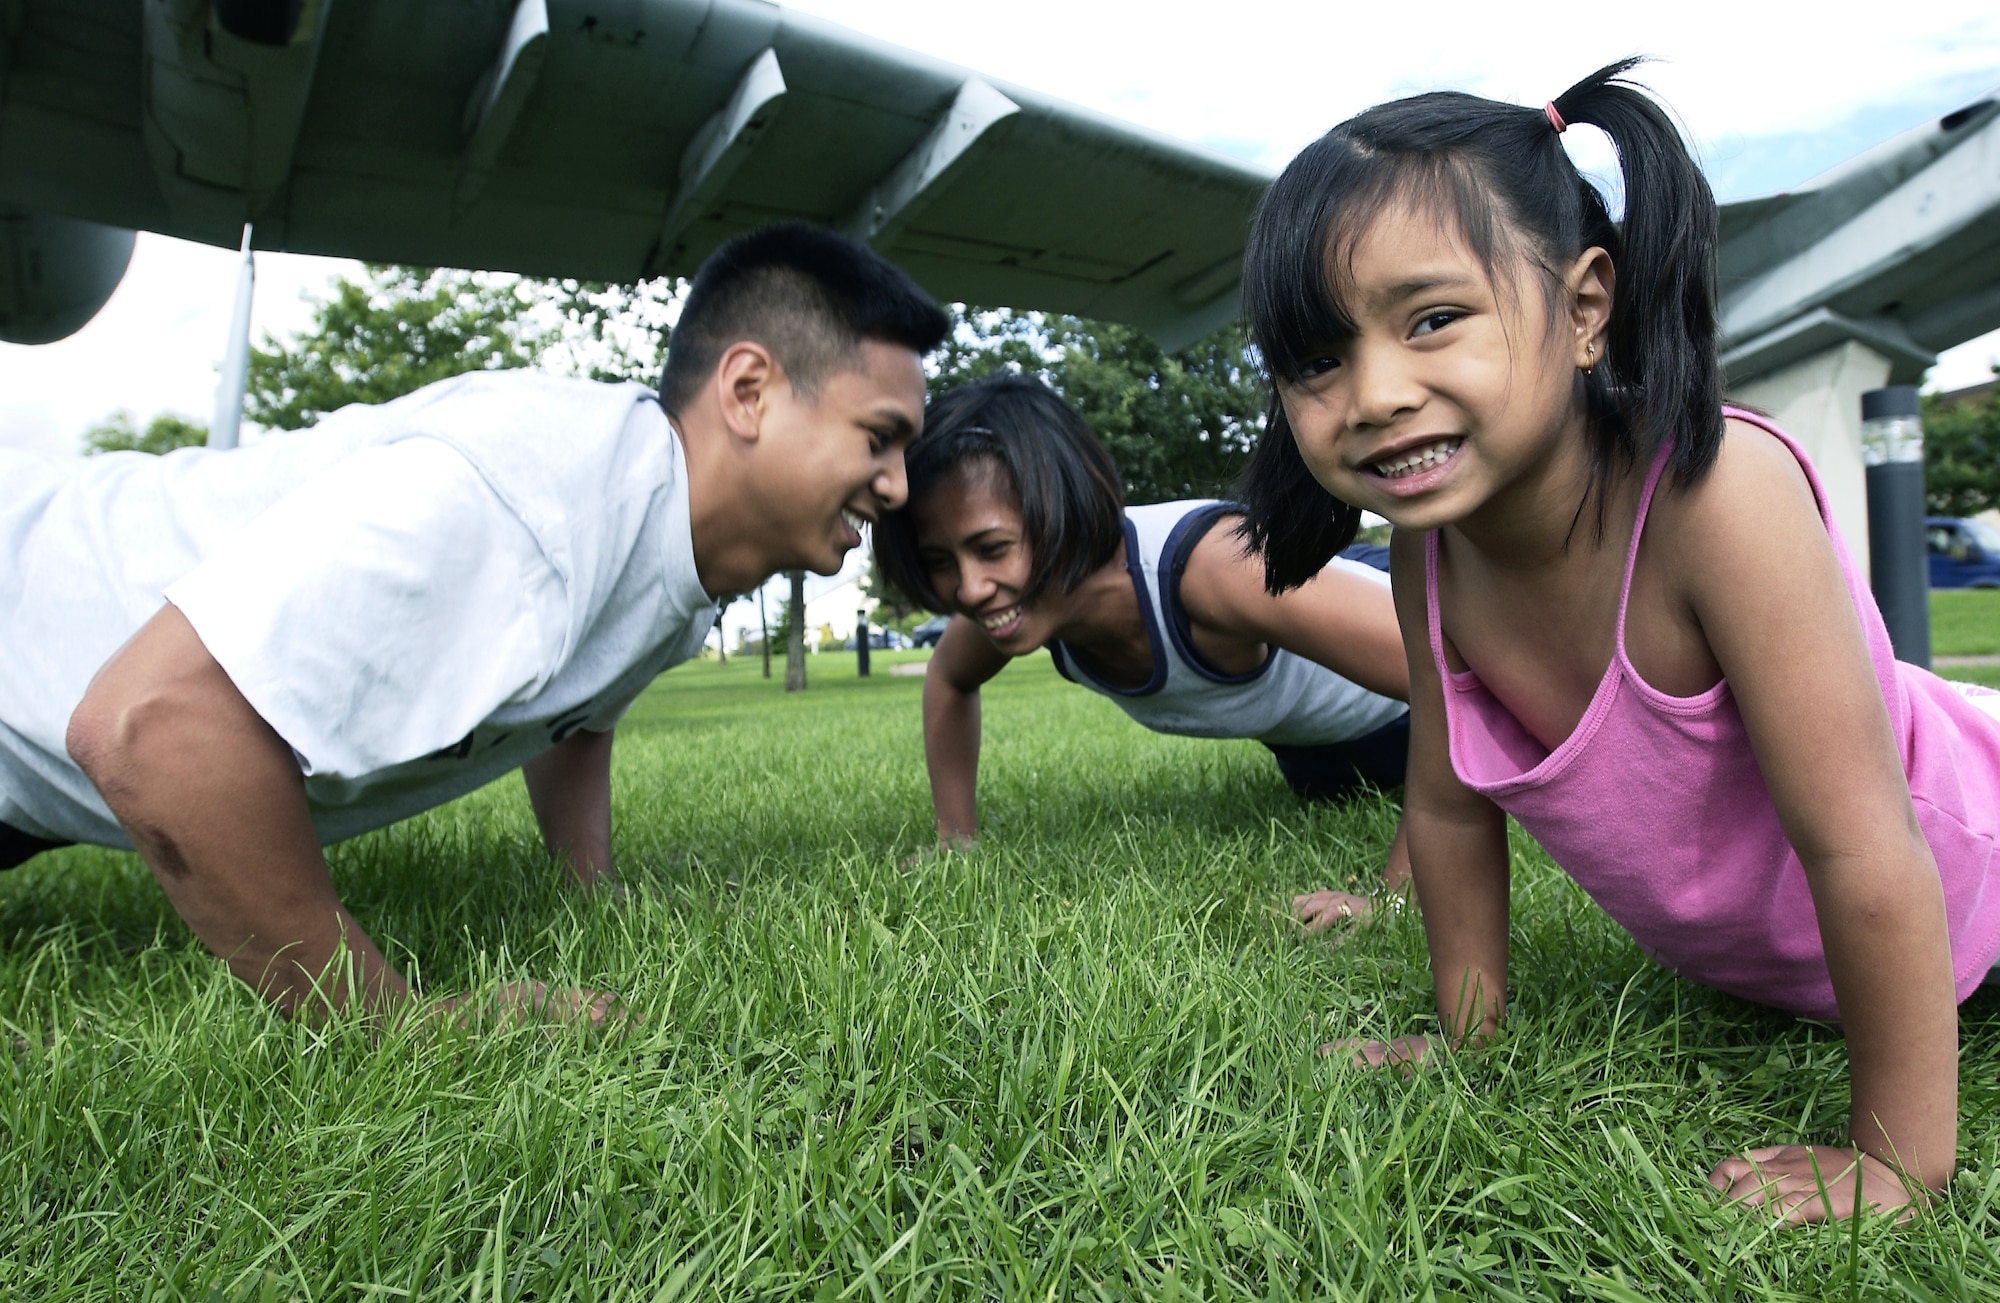 SPANGDAHLEM AIR BASE, Germany -- Staff Sgts. Rodolfo (left) and Mary Anne Reyes have made working out a family affair.  Five-year-old Reanna shows her warrior spirit by doing push-ups with her mom during daily workouts at home.  (U.S. Air Force photo by Master Sgt. Keith Reed)